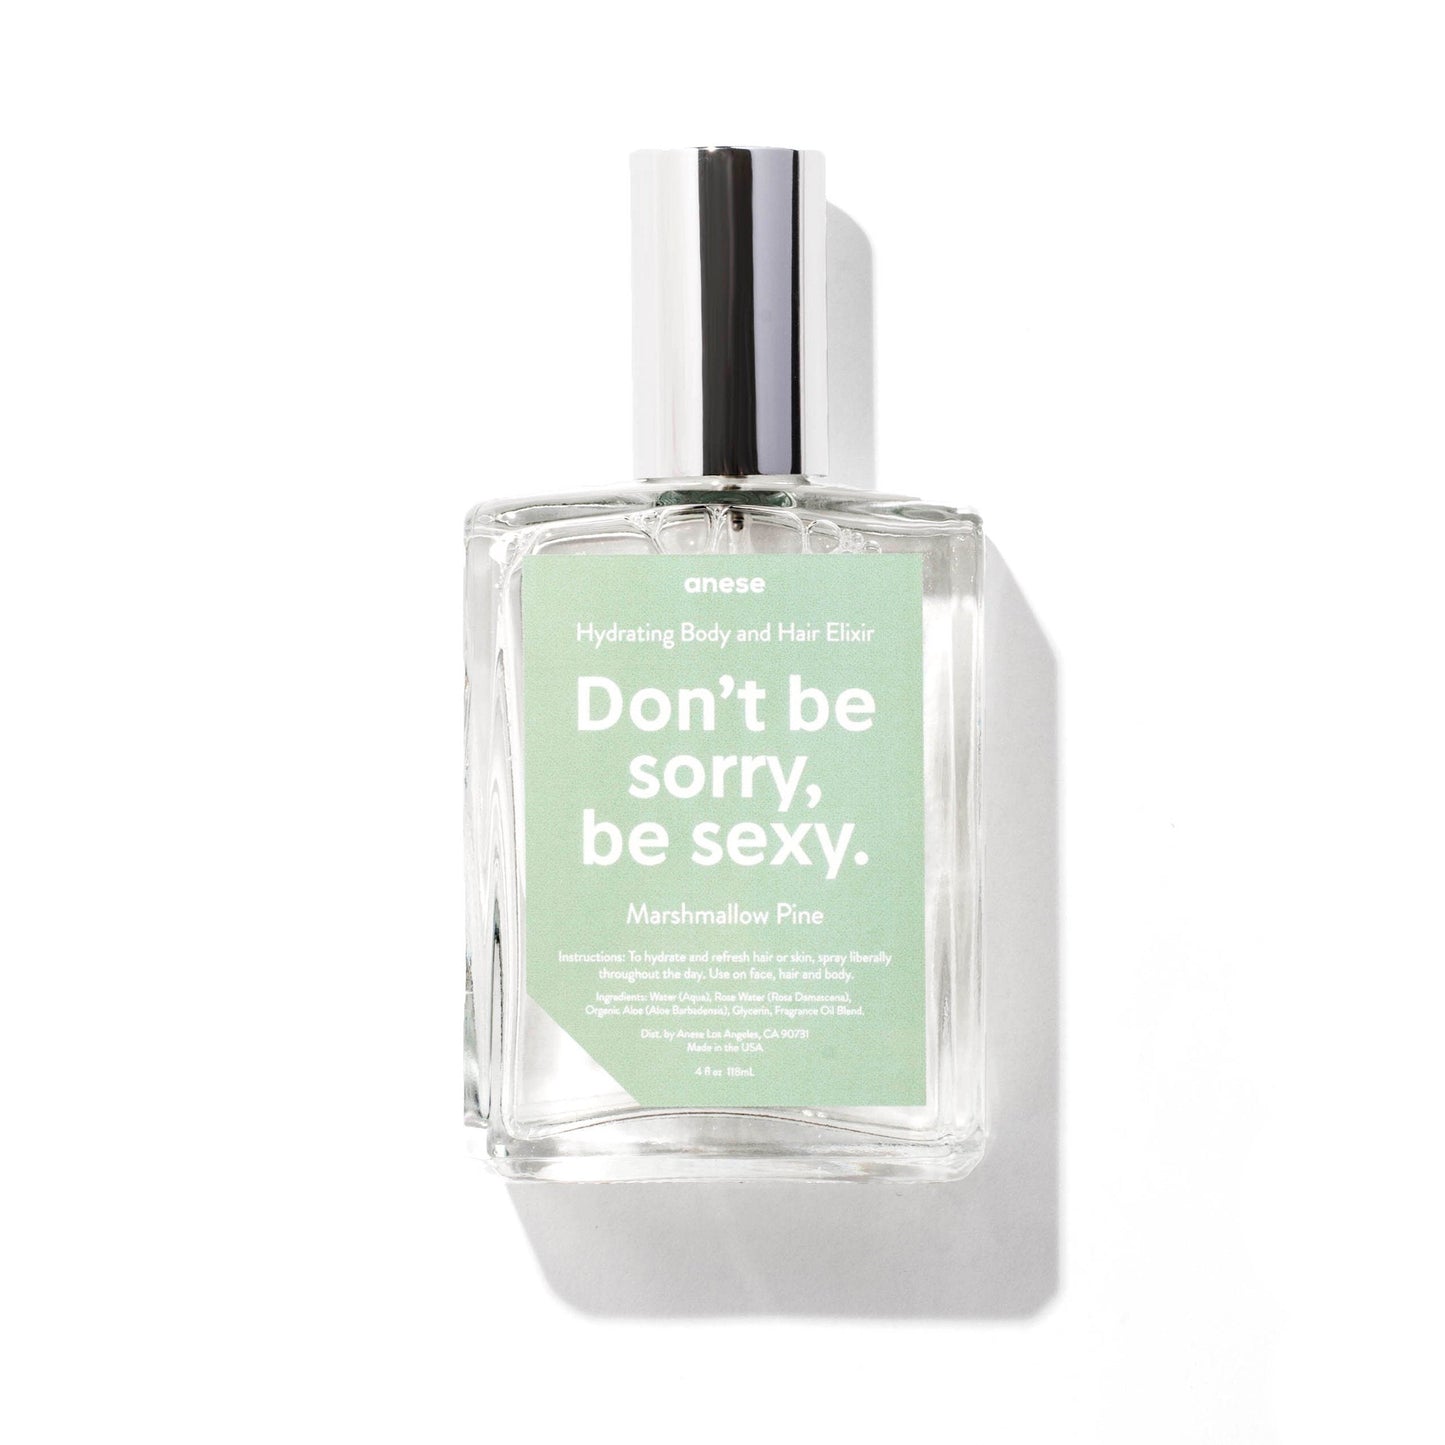 Don't be sorry be sexy. Hydrating Body & Hair Elixir anese